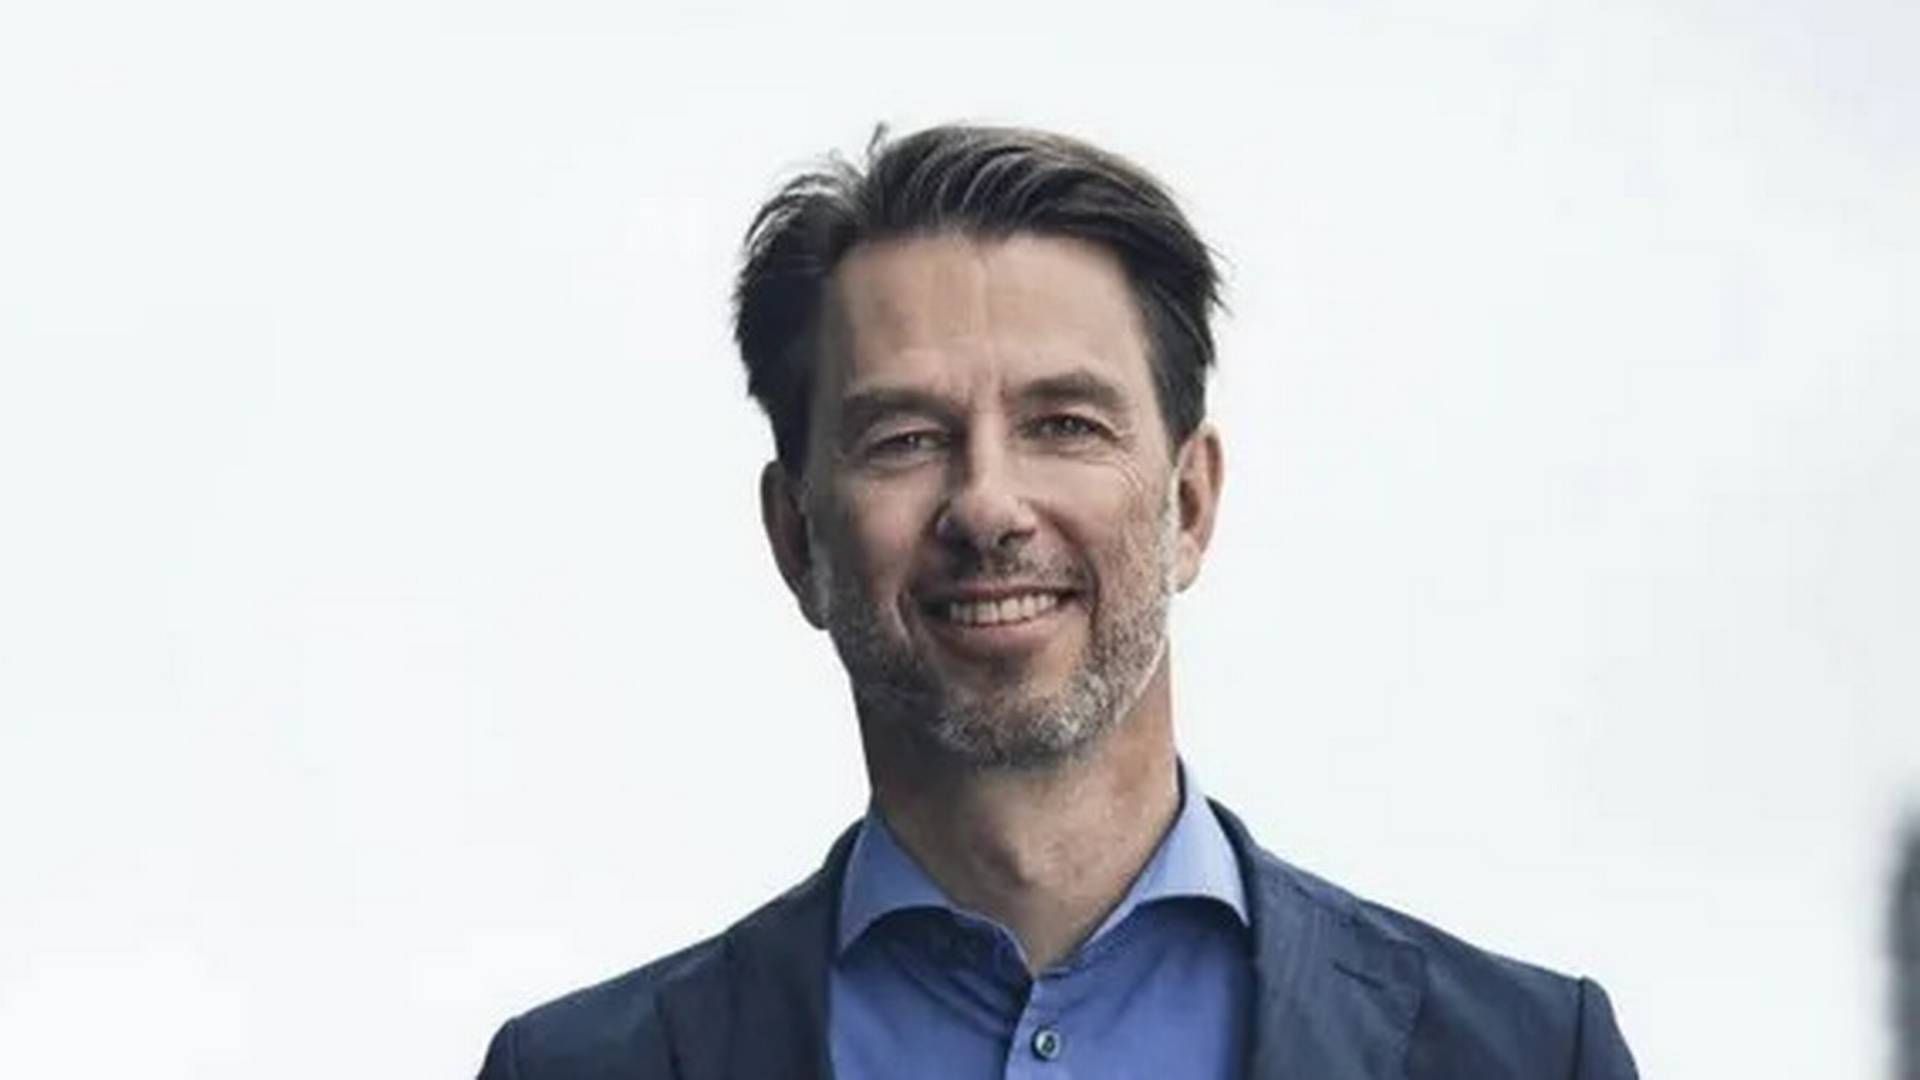 Eric Pedersen, Head of Responsible Investments at Nordea AM, moves from Vice Chair to Chair of Dansif. | Photo: PR / Nordea